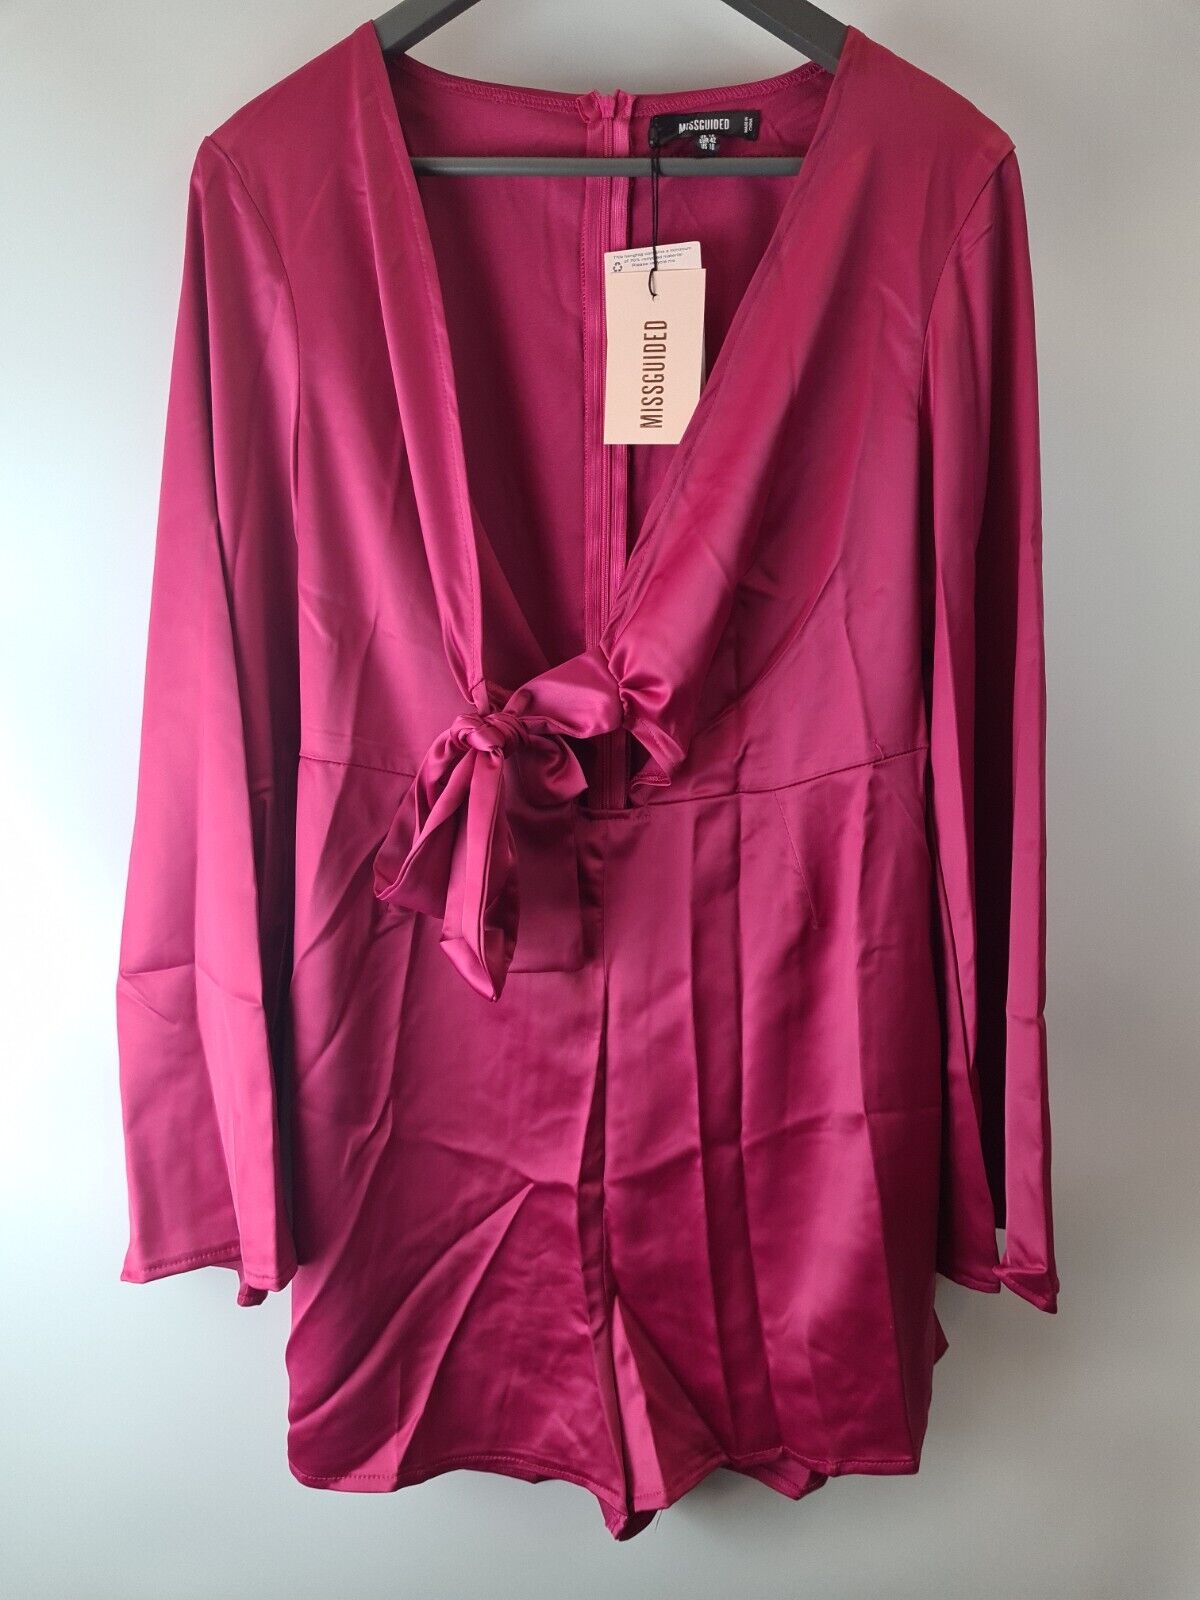 Missguided Satin Tie Front Flare Sleeves Hot Pink Playsuit Size 10 **** V44